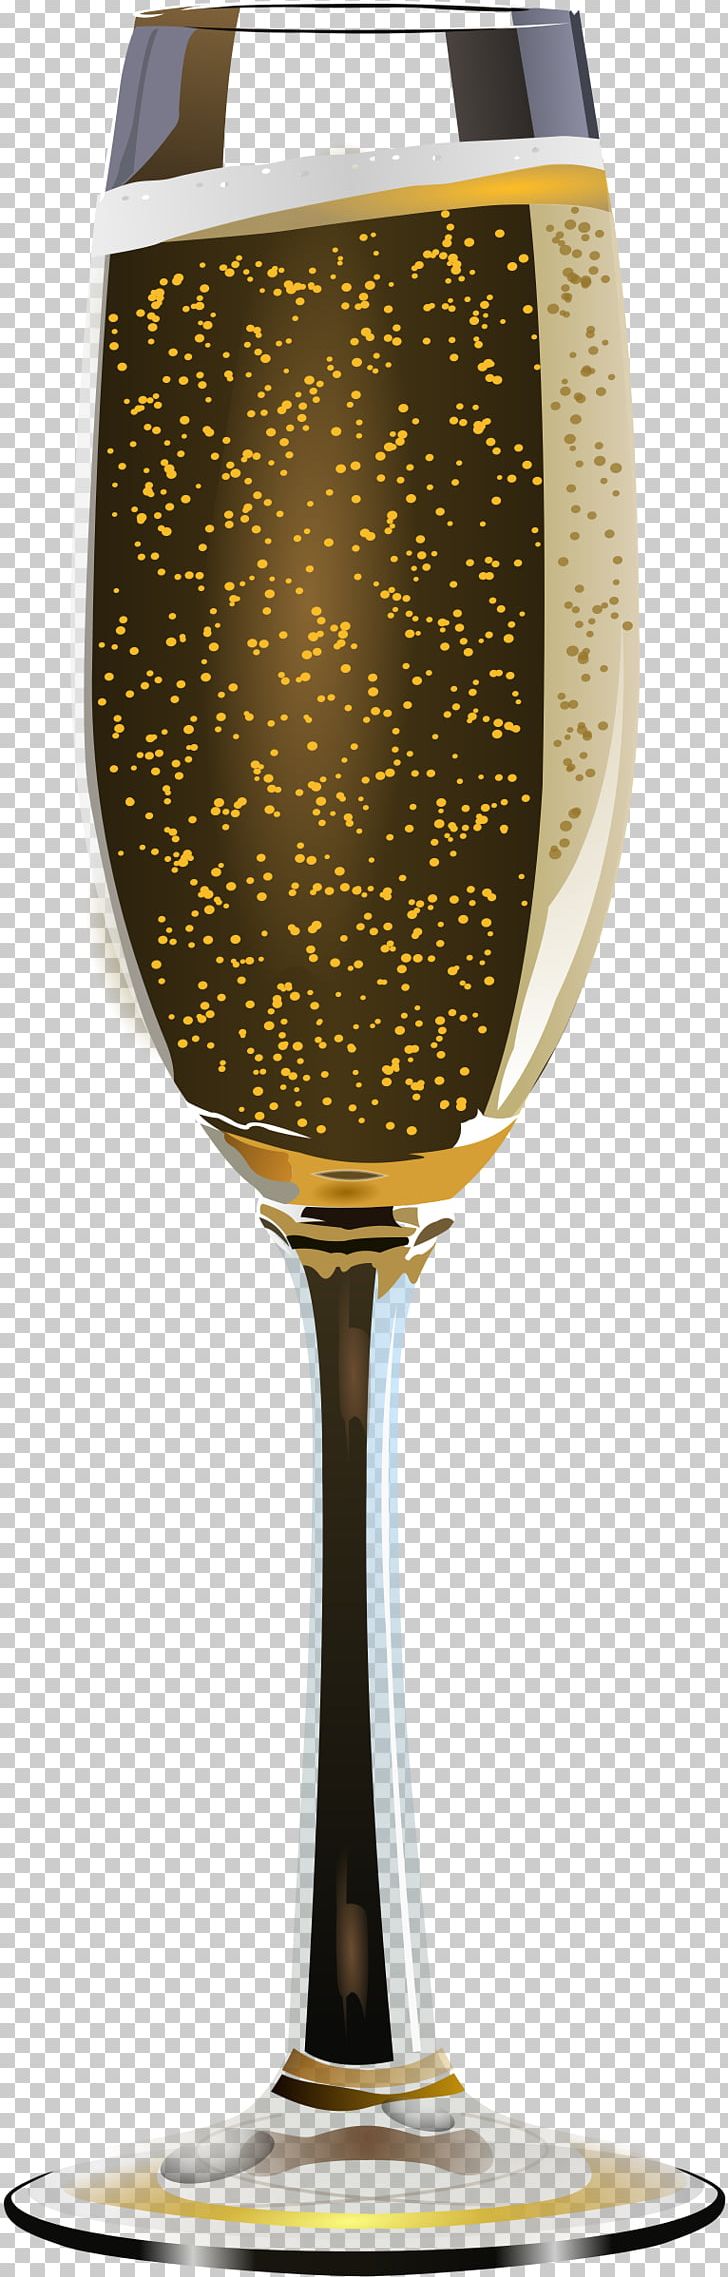 Champagne Glass Sparkling Wine PNG, Clipart, Alcoholic Drink, Beer Glass, Beer Glasses, Bubble, Champagne Free PNG Download